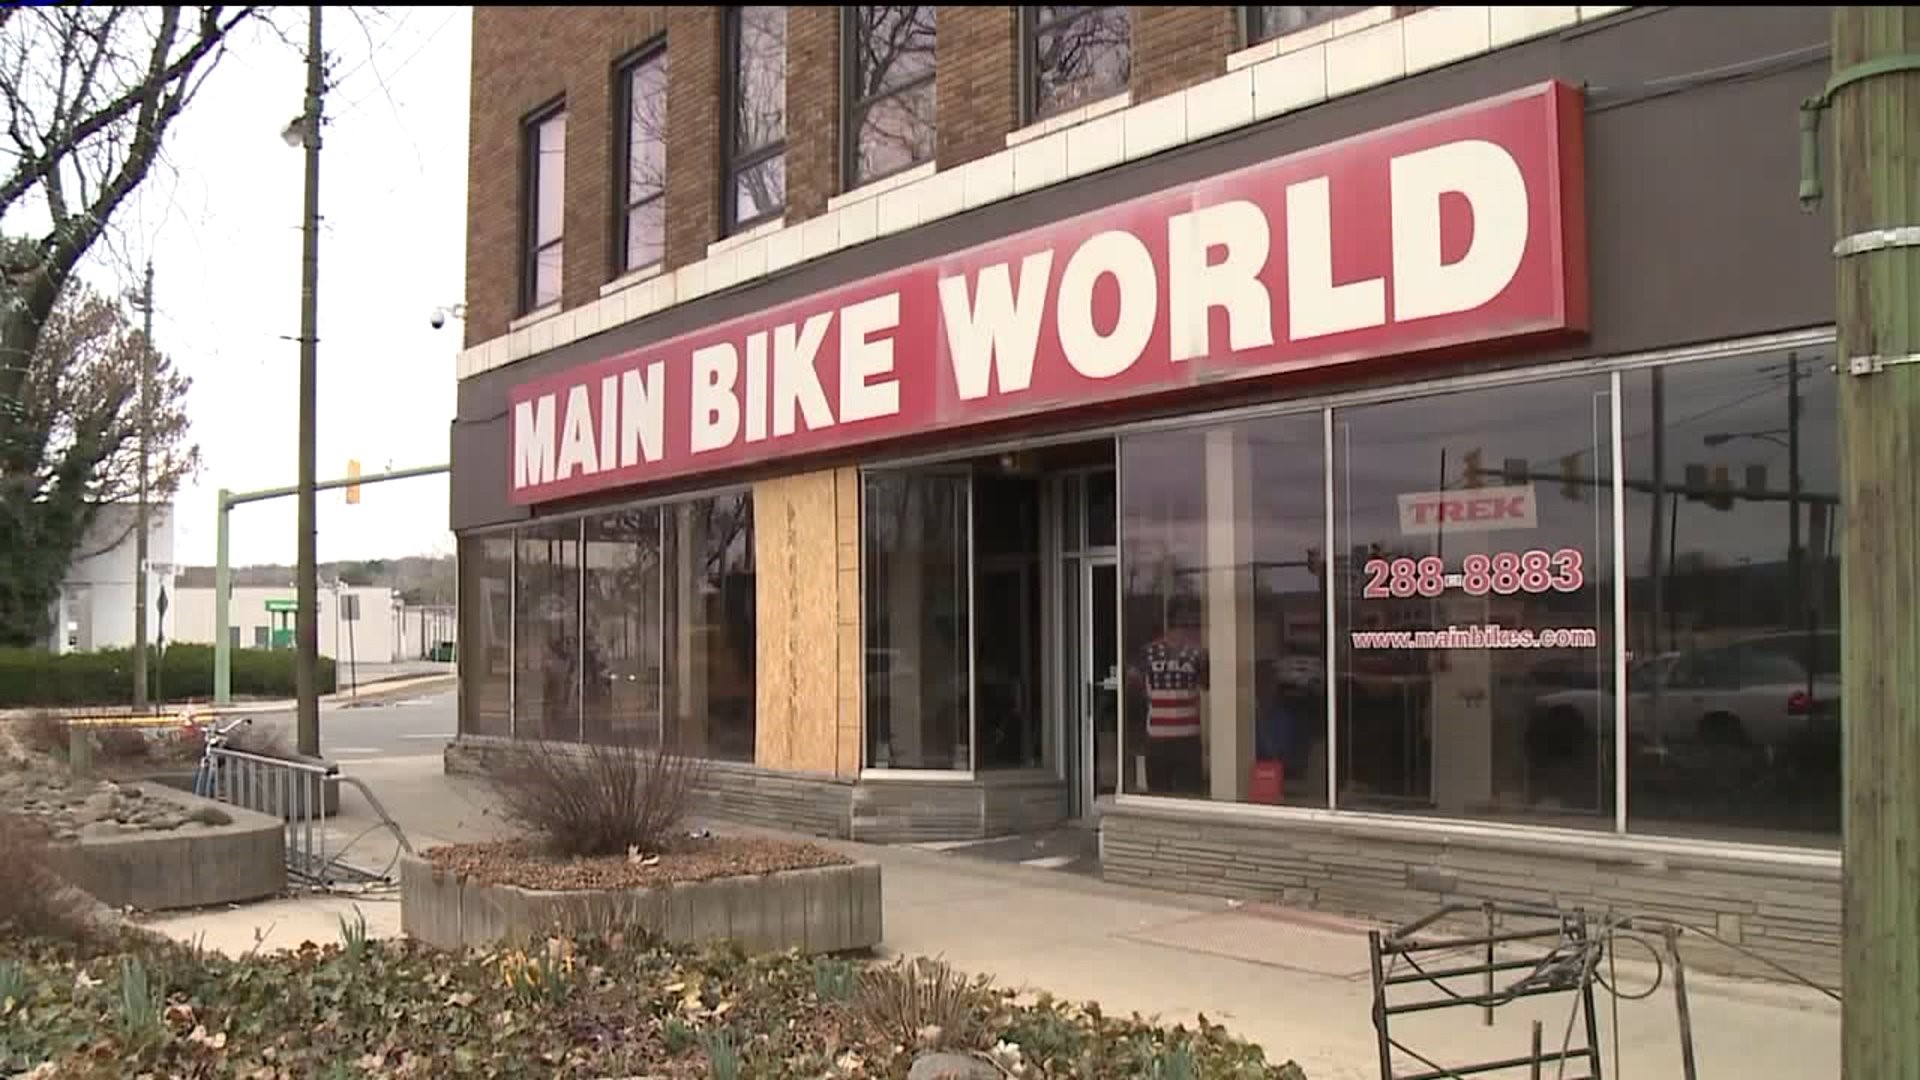 Main Bike World Closes, Another business Expected to Move In